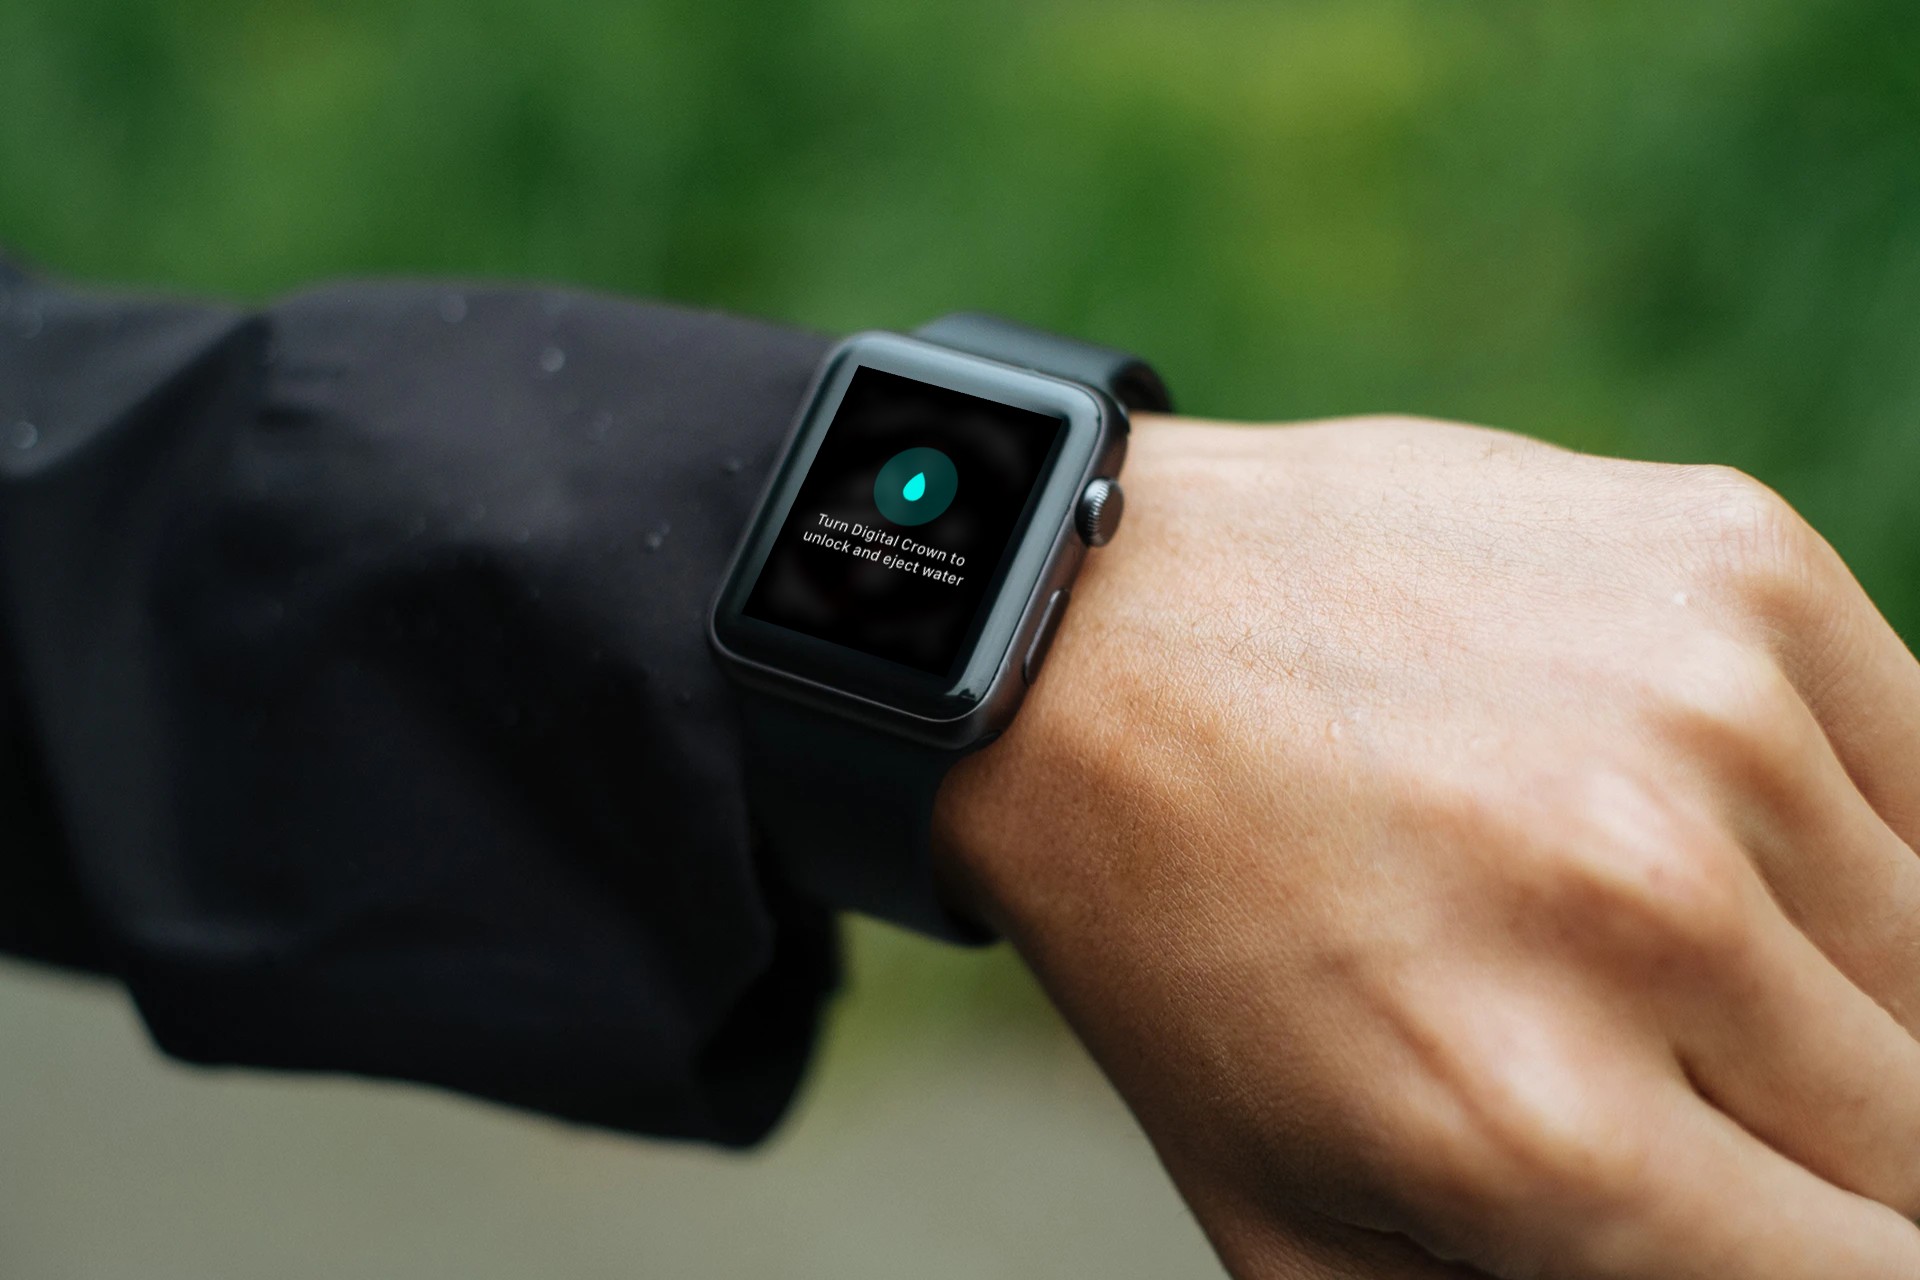 How Does the Apple Watch Release Water?